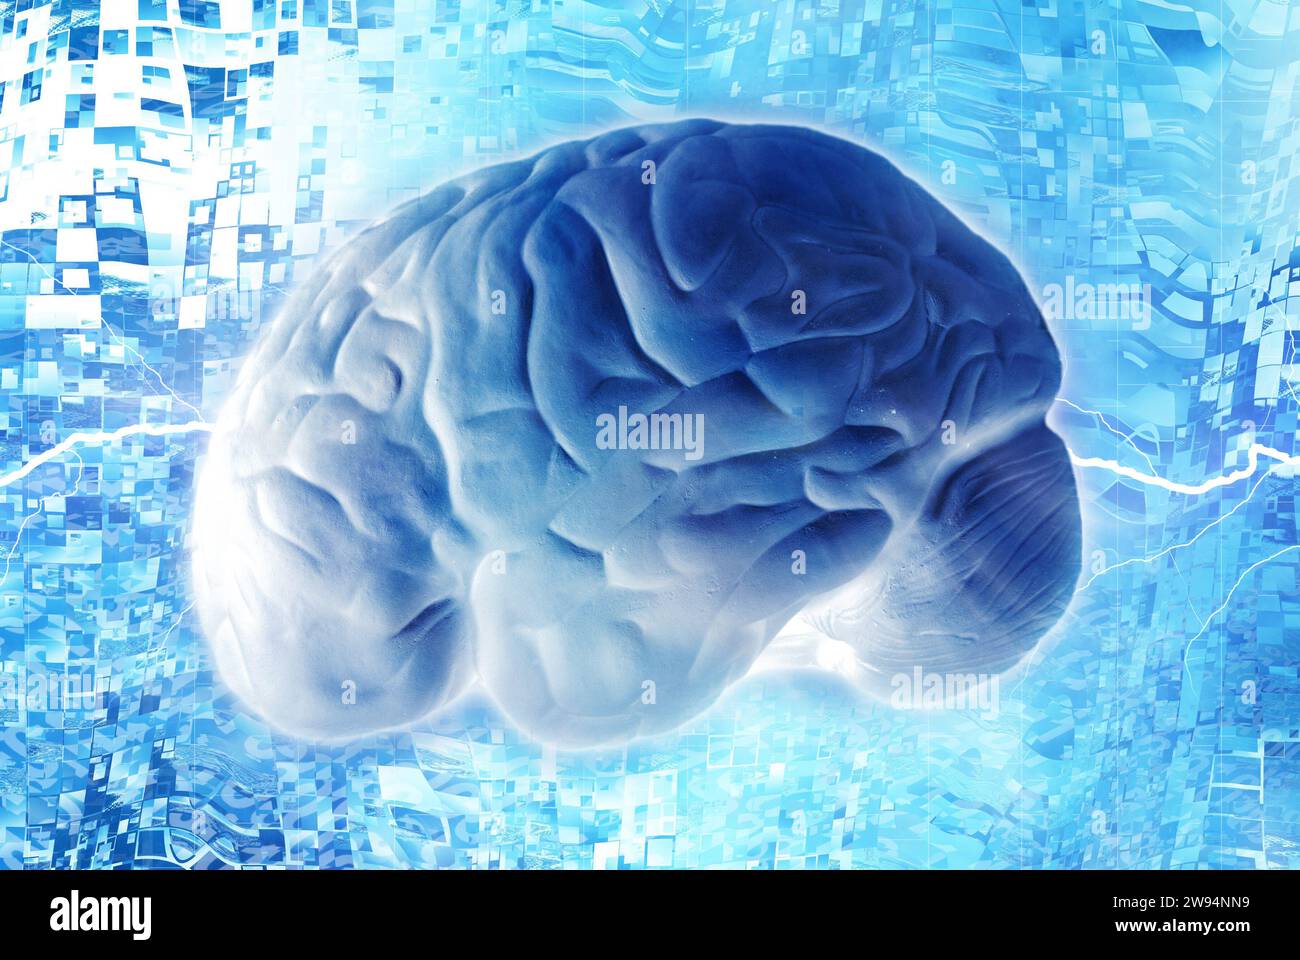 human brain with an abstract background Stock Photo